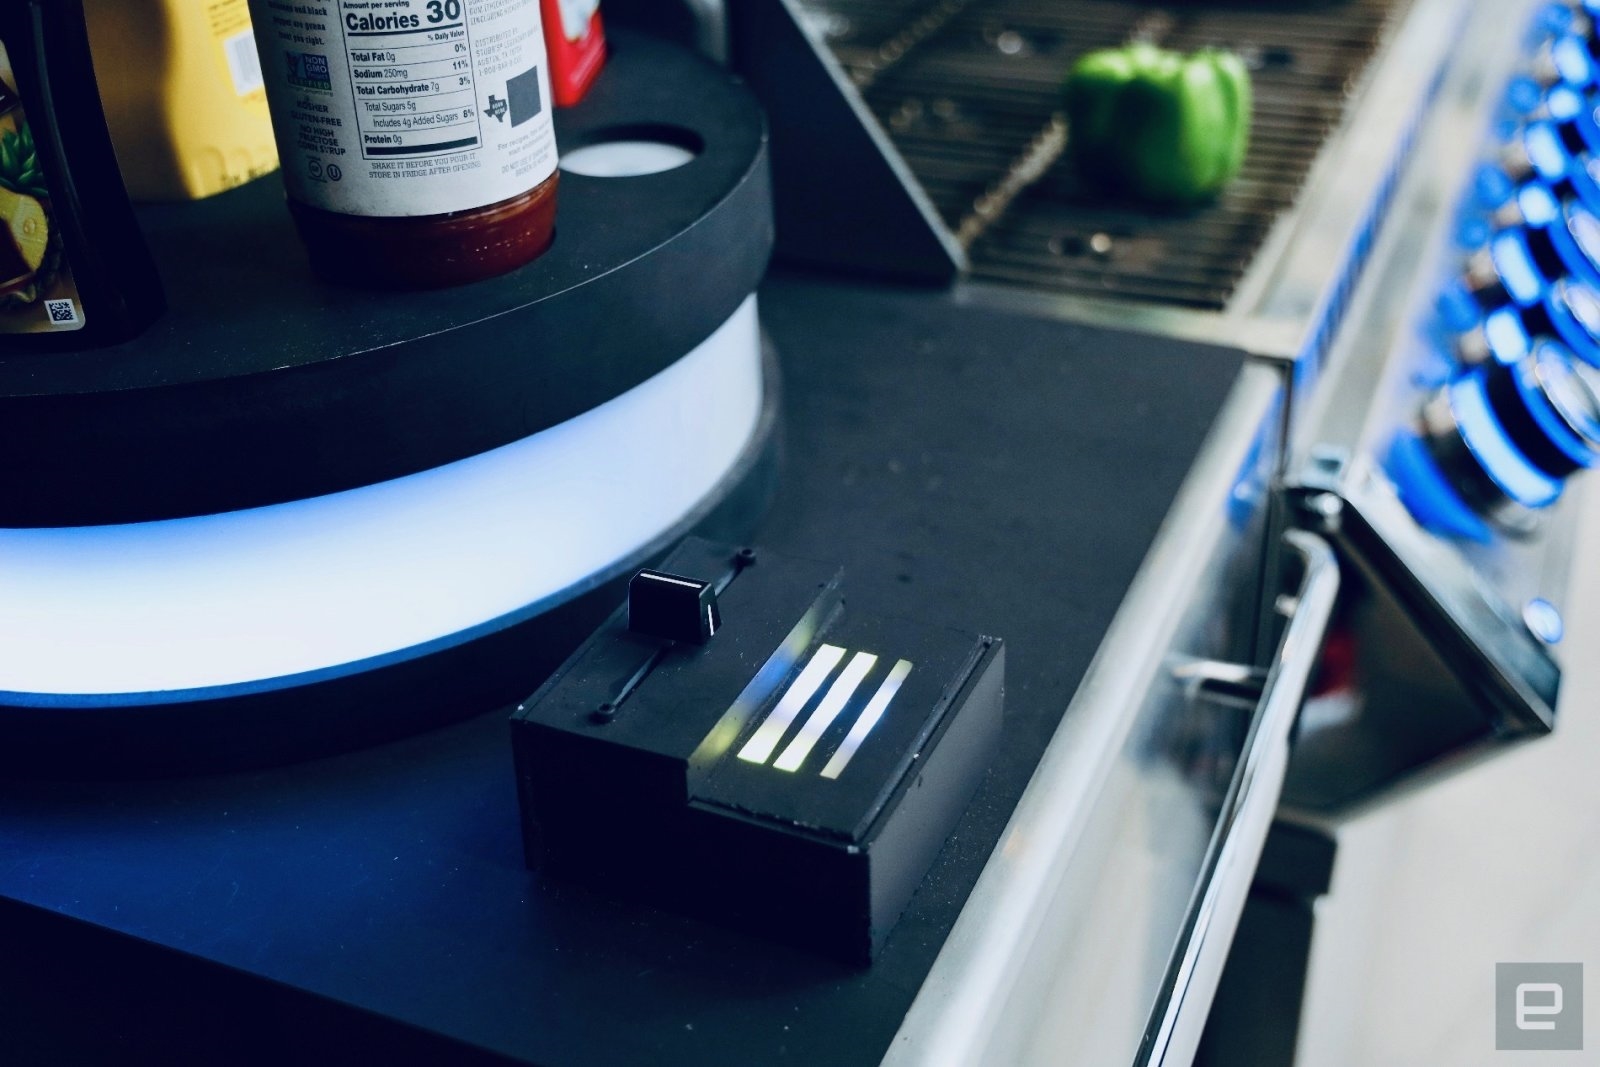 McCormick's concept grill plays music based on what you're cooking | DeviceDaily.com